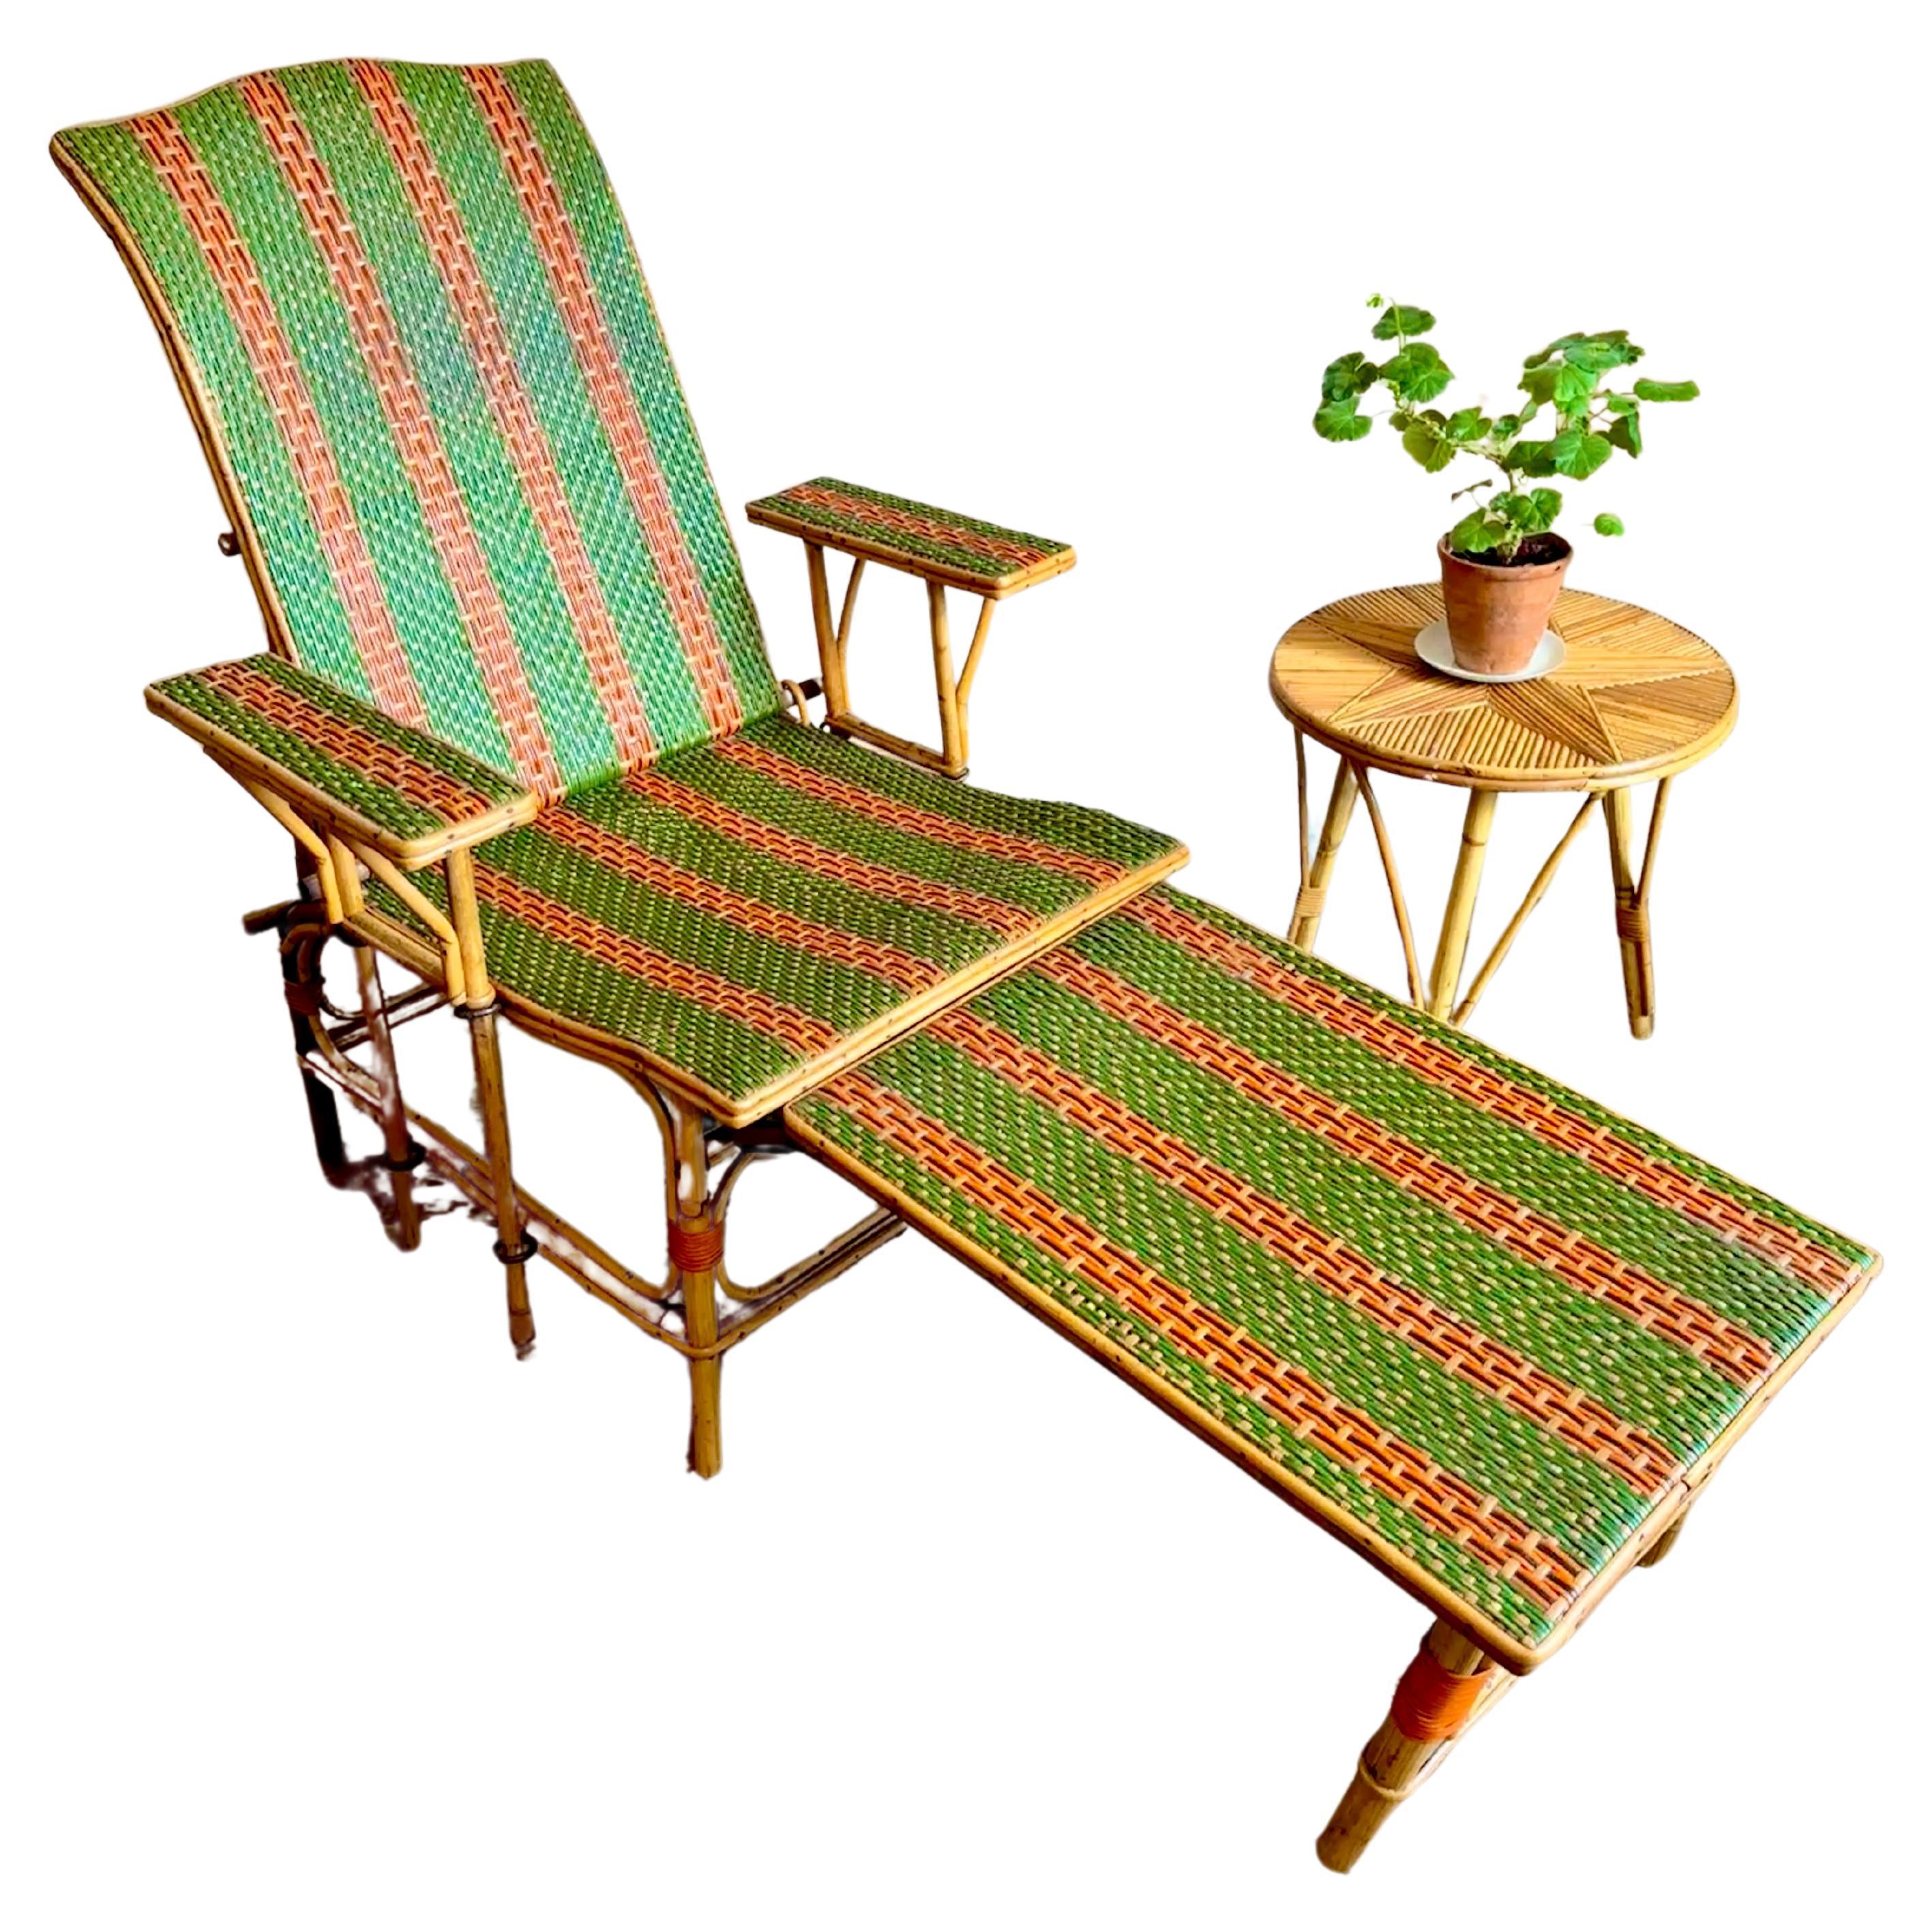 Early C20th French Bamboo & Rattan Chaise Longue Sun Lounger